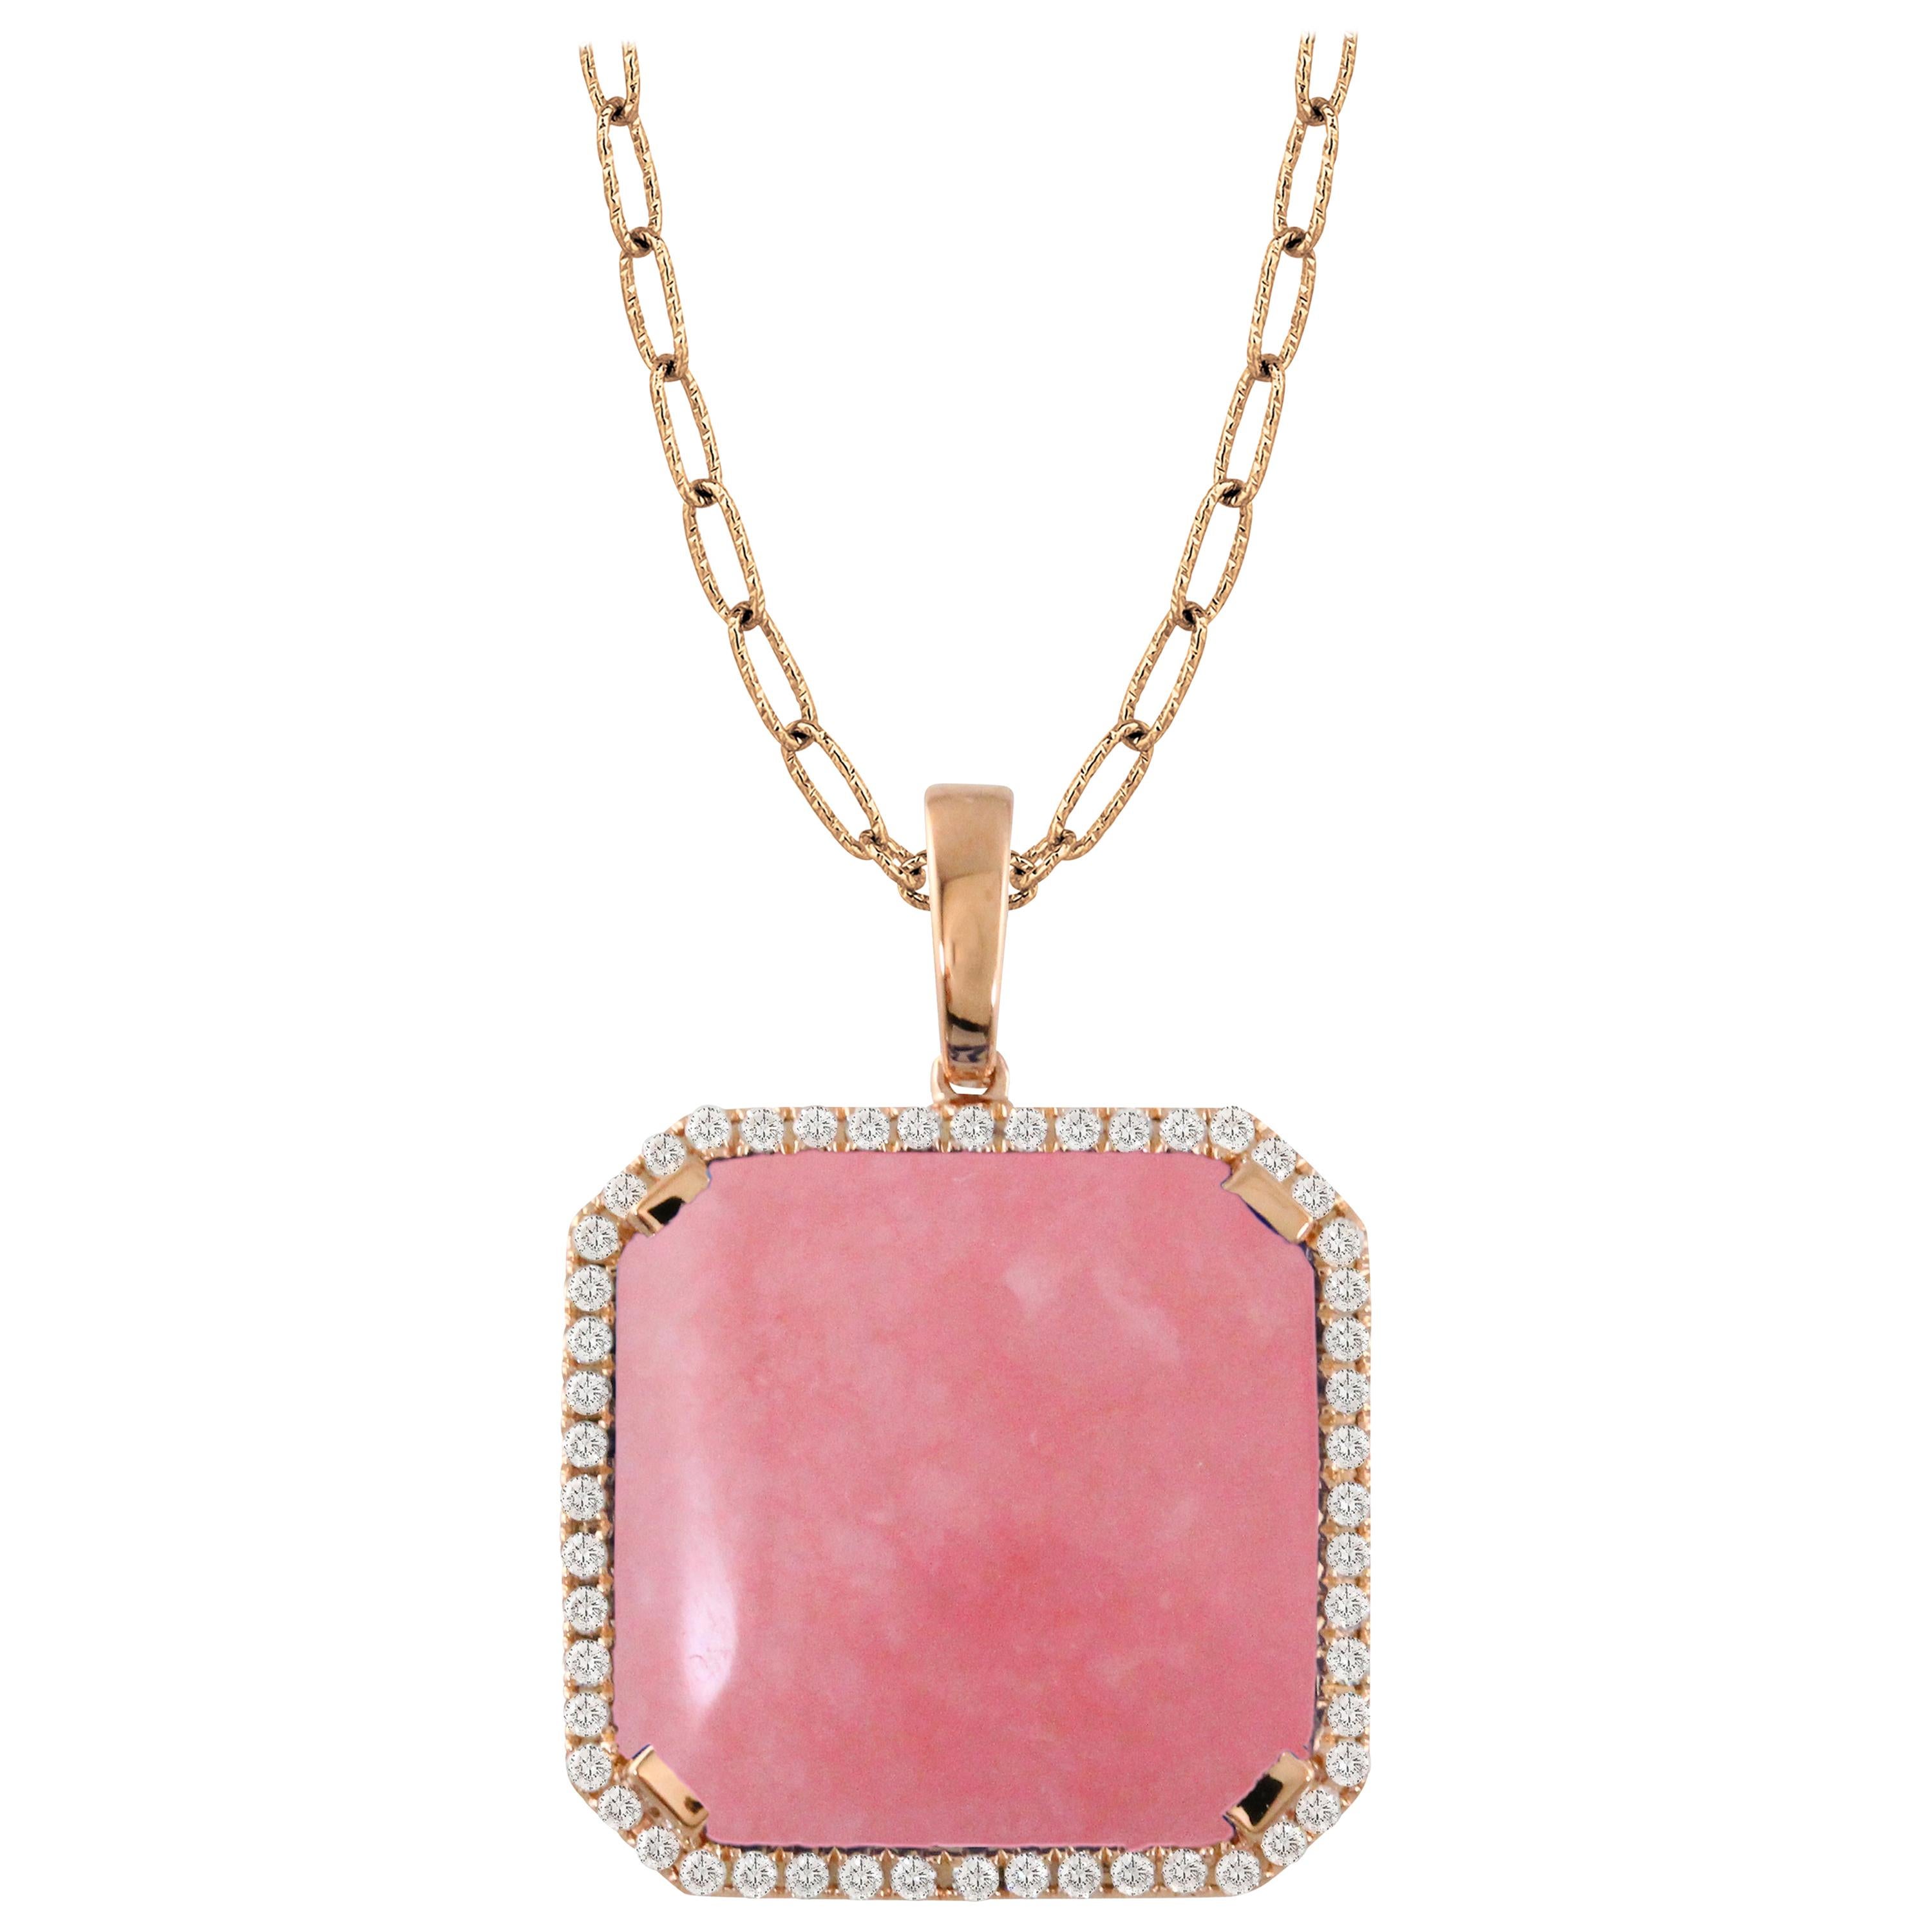 Doves 18 Karat Rose Gold Pendant Necklace with Cabochon Pink Opal and Diamonds